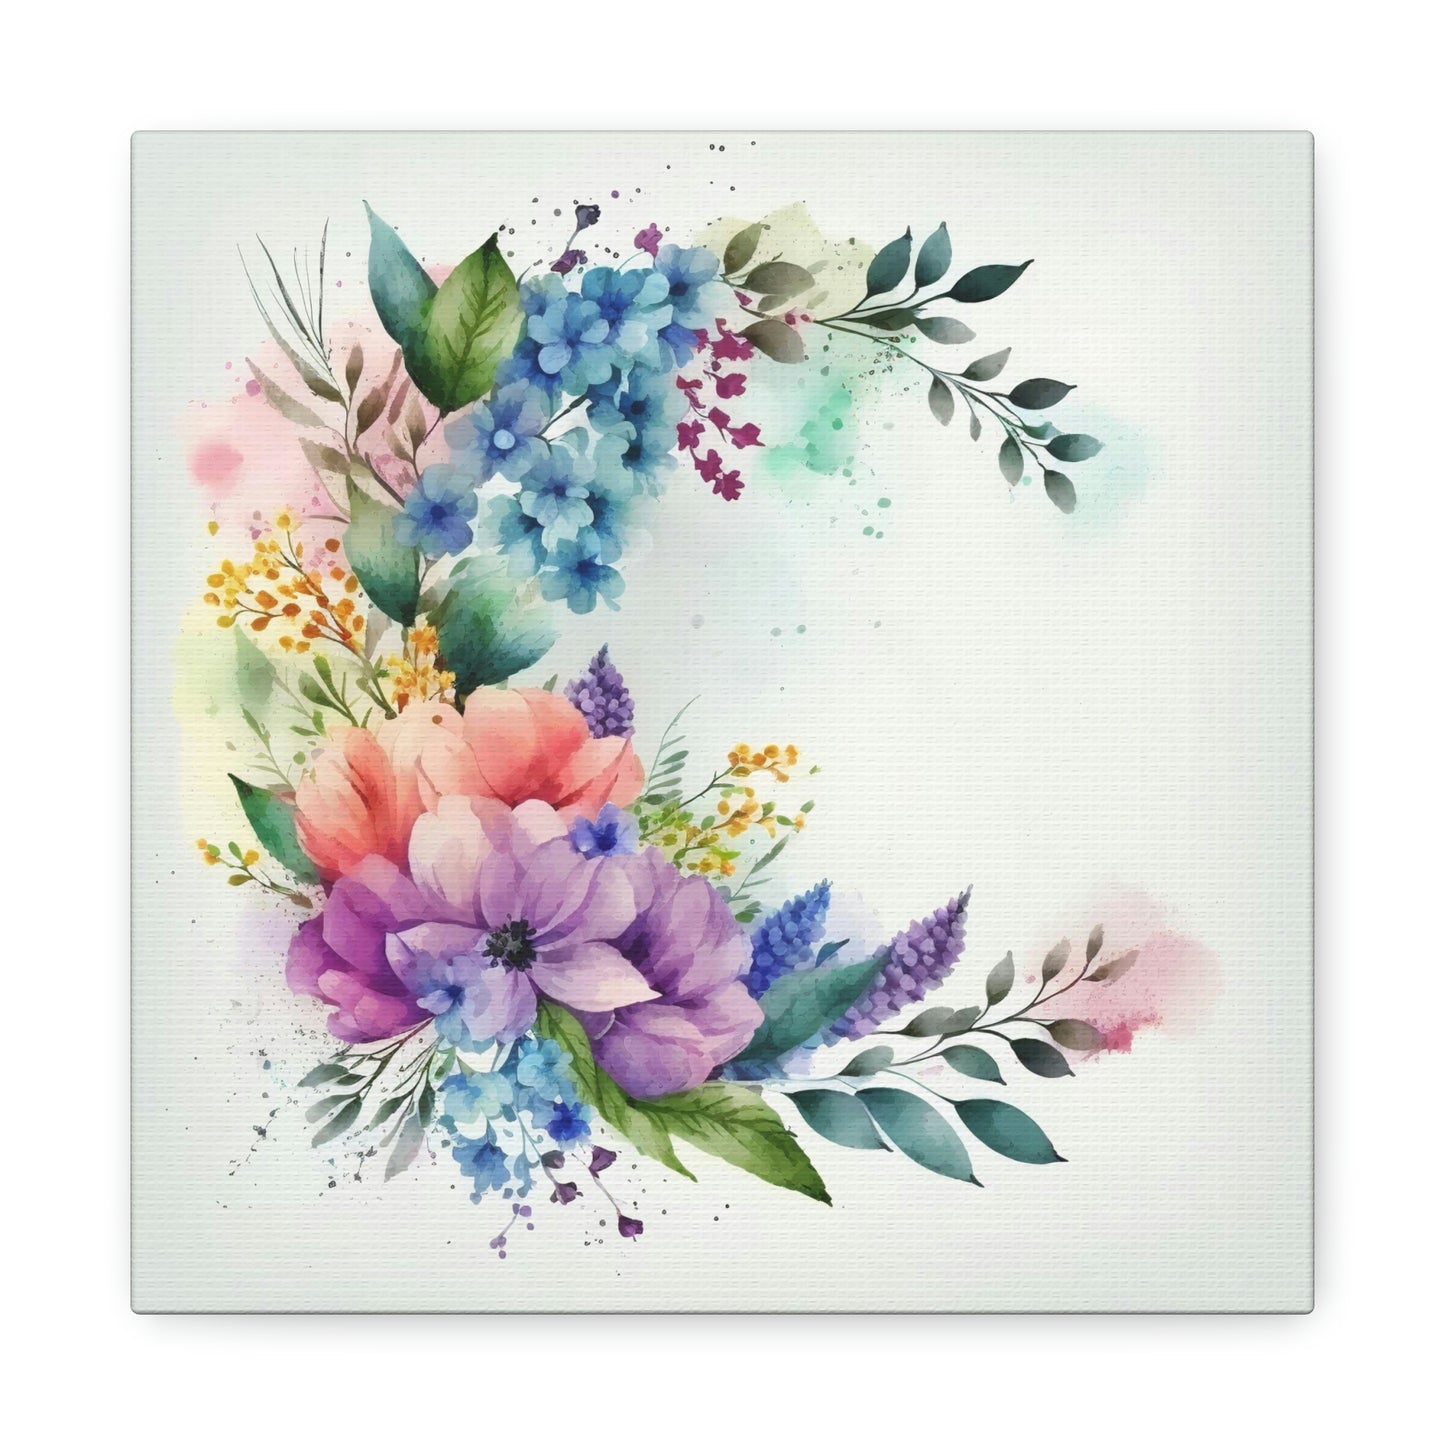 purple and blue floral canvas wall art print, watercolor floral canvas wall decor